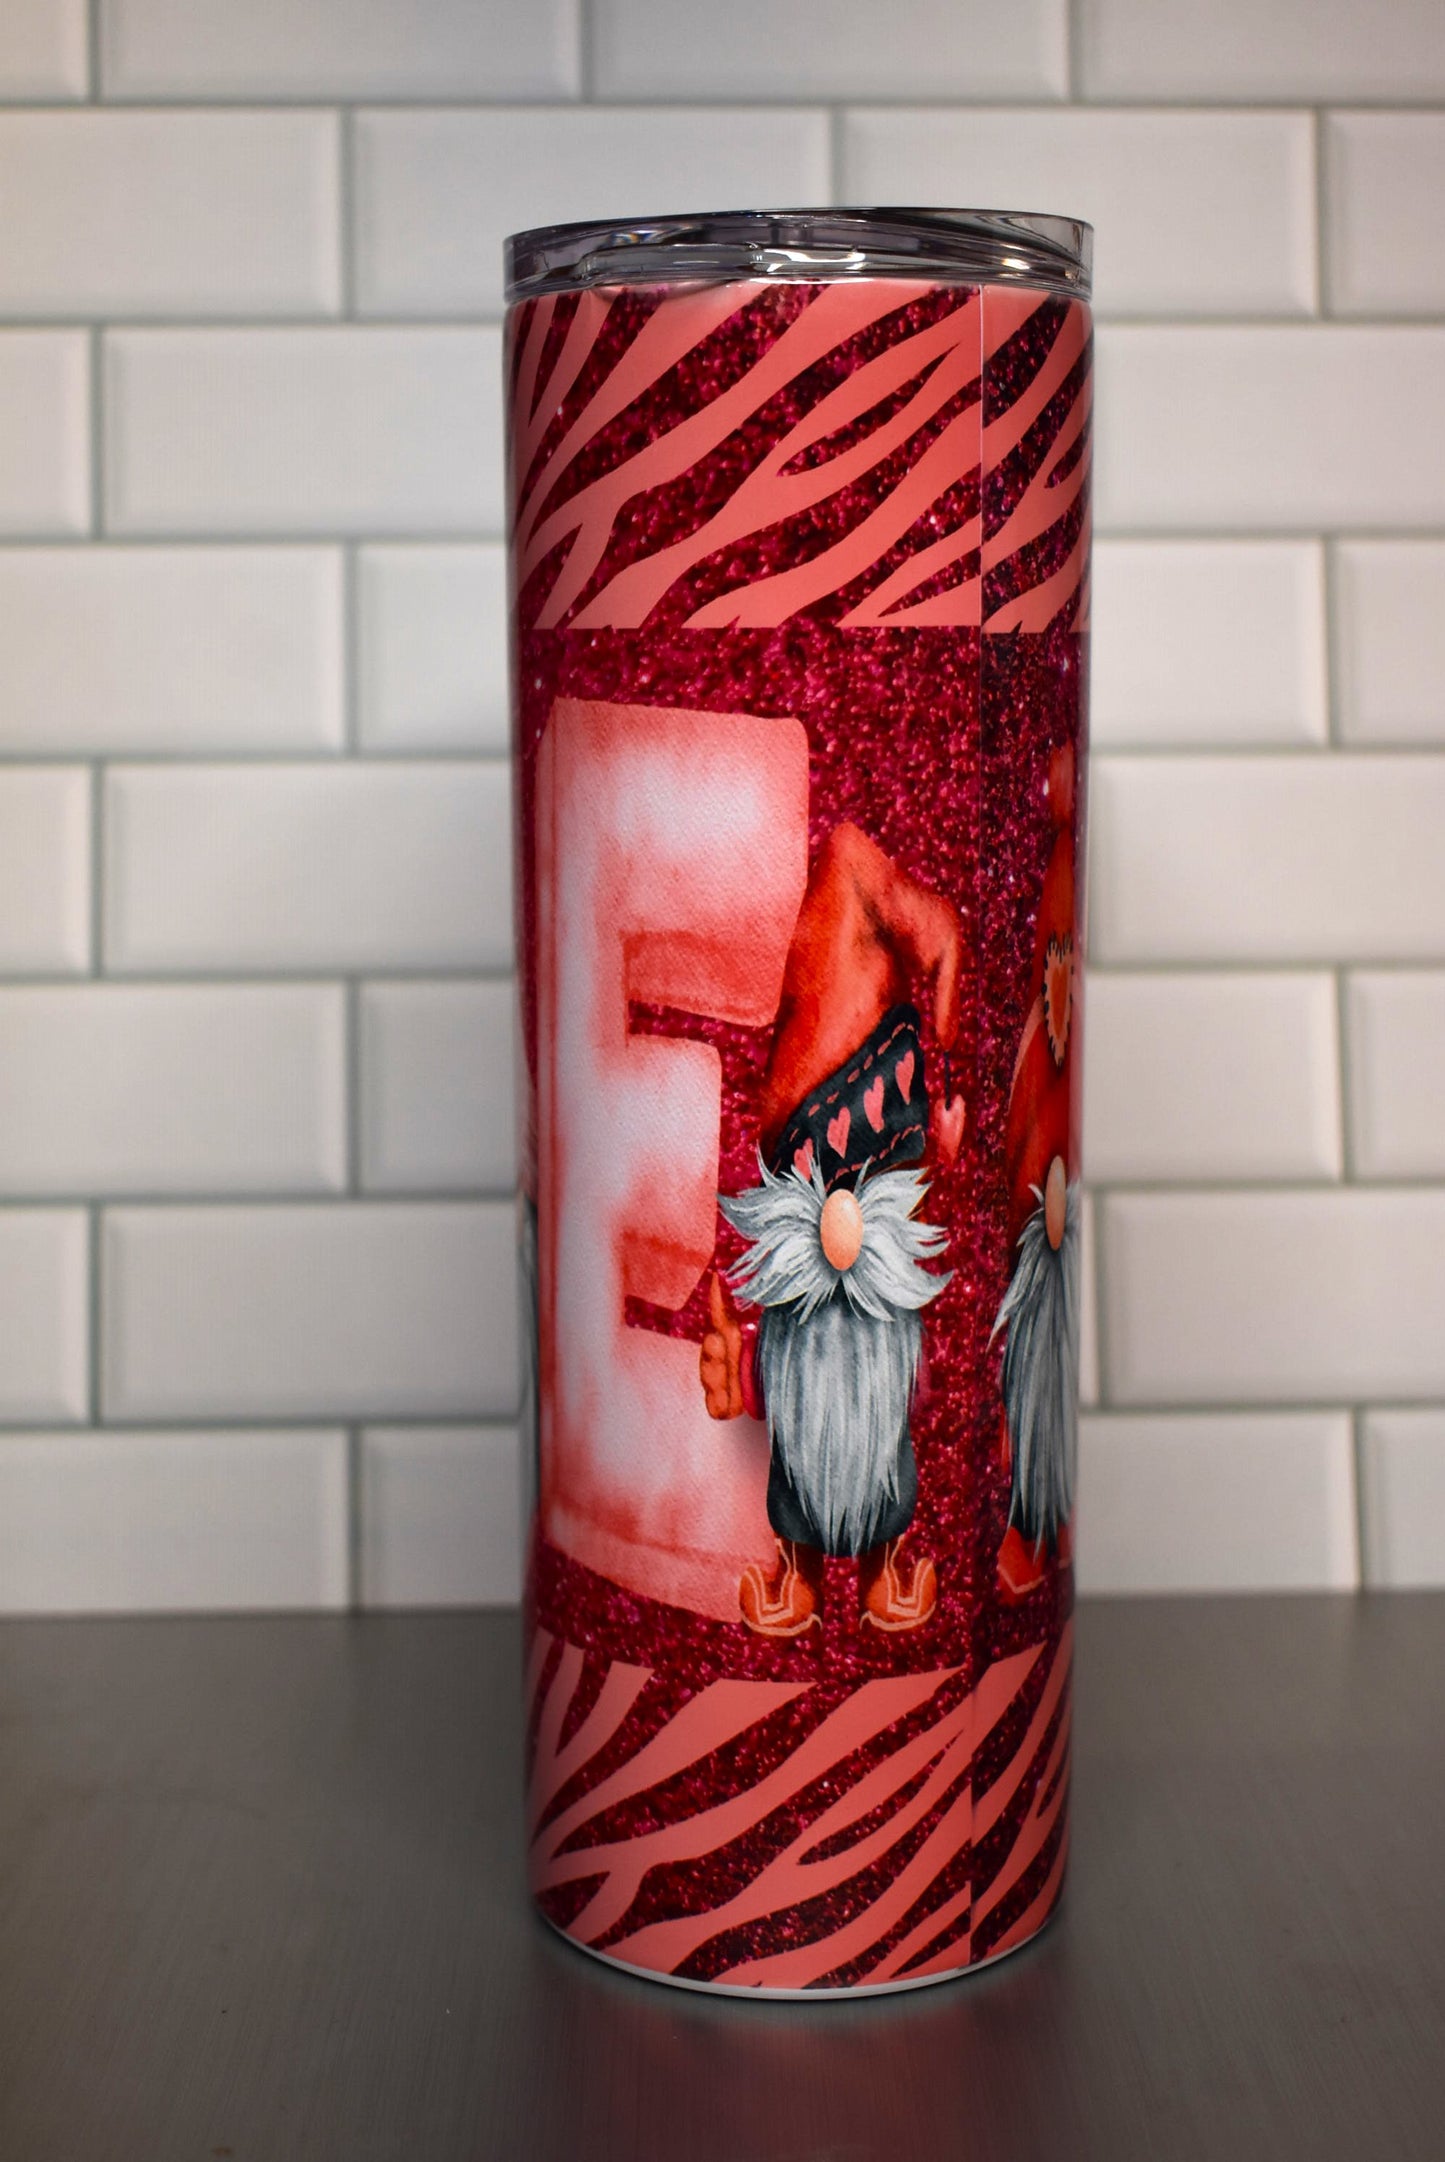 Love is in the air and has pretty glitter as well. This Valentines Gnome Love Tumbler is a eye catcher and heart stealer.